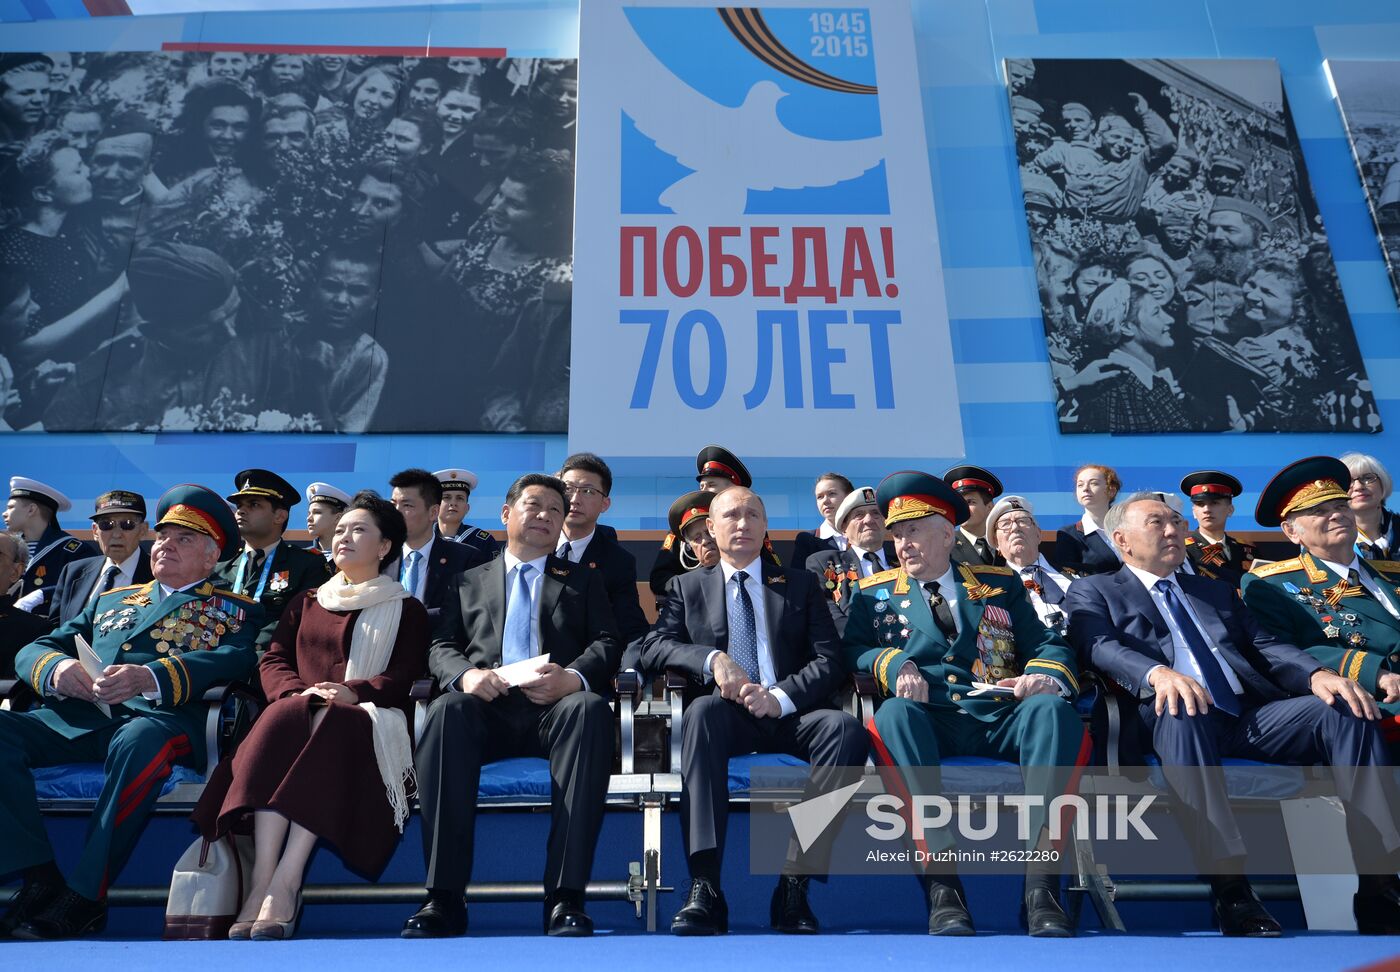 Vladimir Putin attends military parade to mark 70th anniversary of Victory in 1941-1945 Great Patriotic War